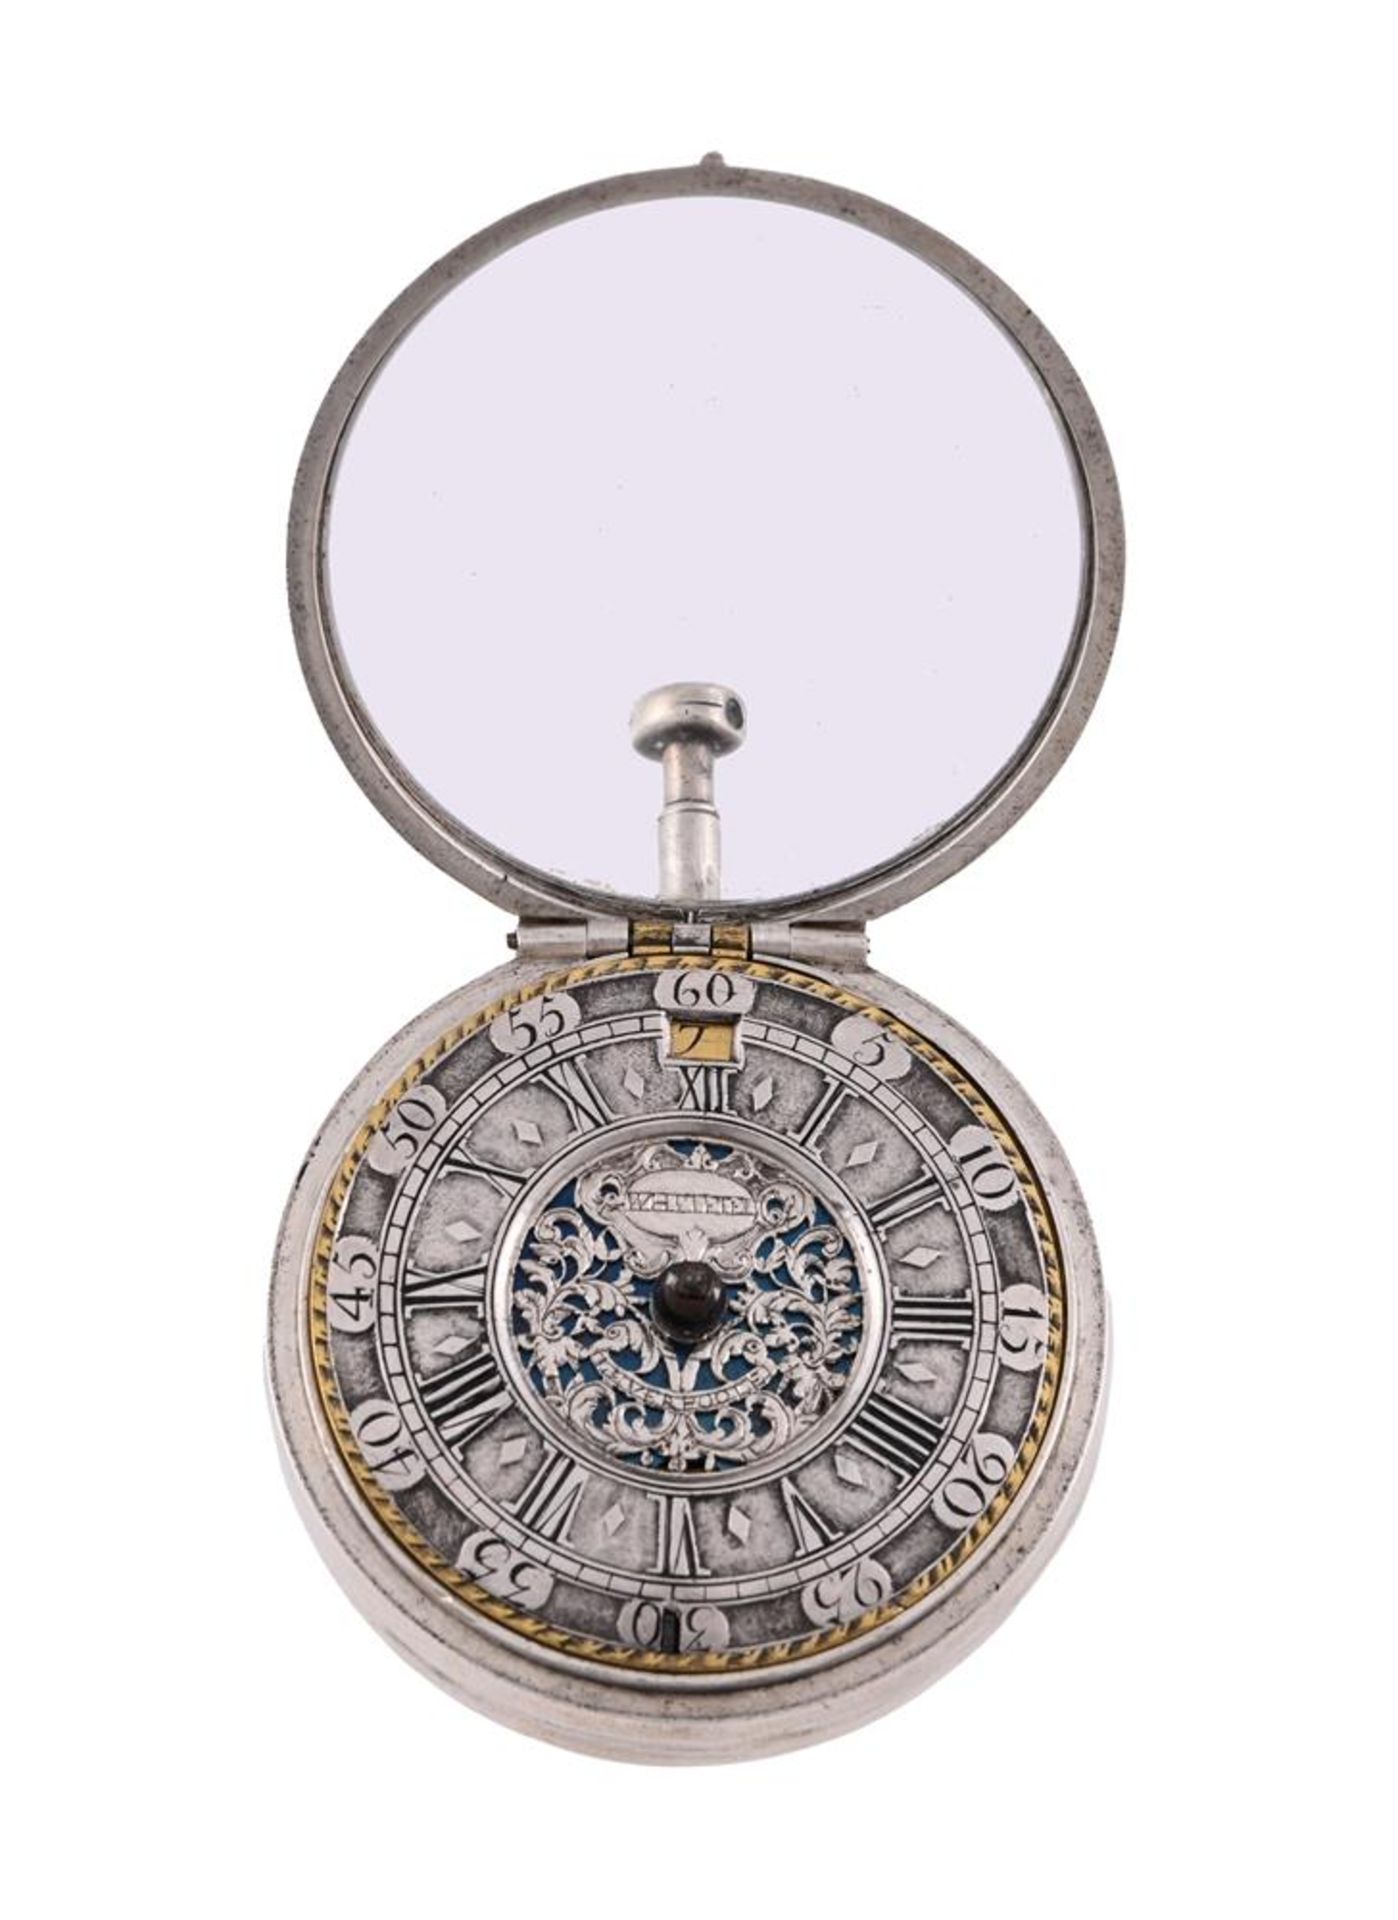 A RARE PROVINCIAL SILVER LARGER PAIR-CASED VERGE POCKET WATCH WITH CHAMPLEVE DIAL - Image 2 of 5